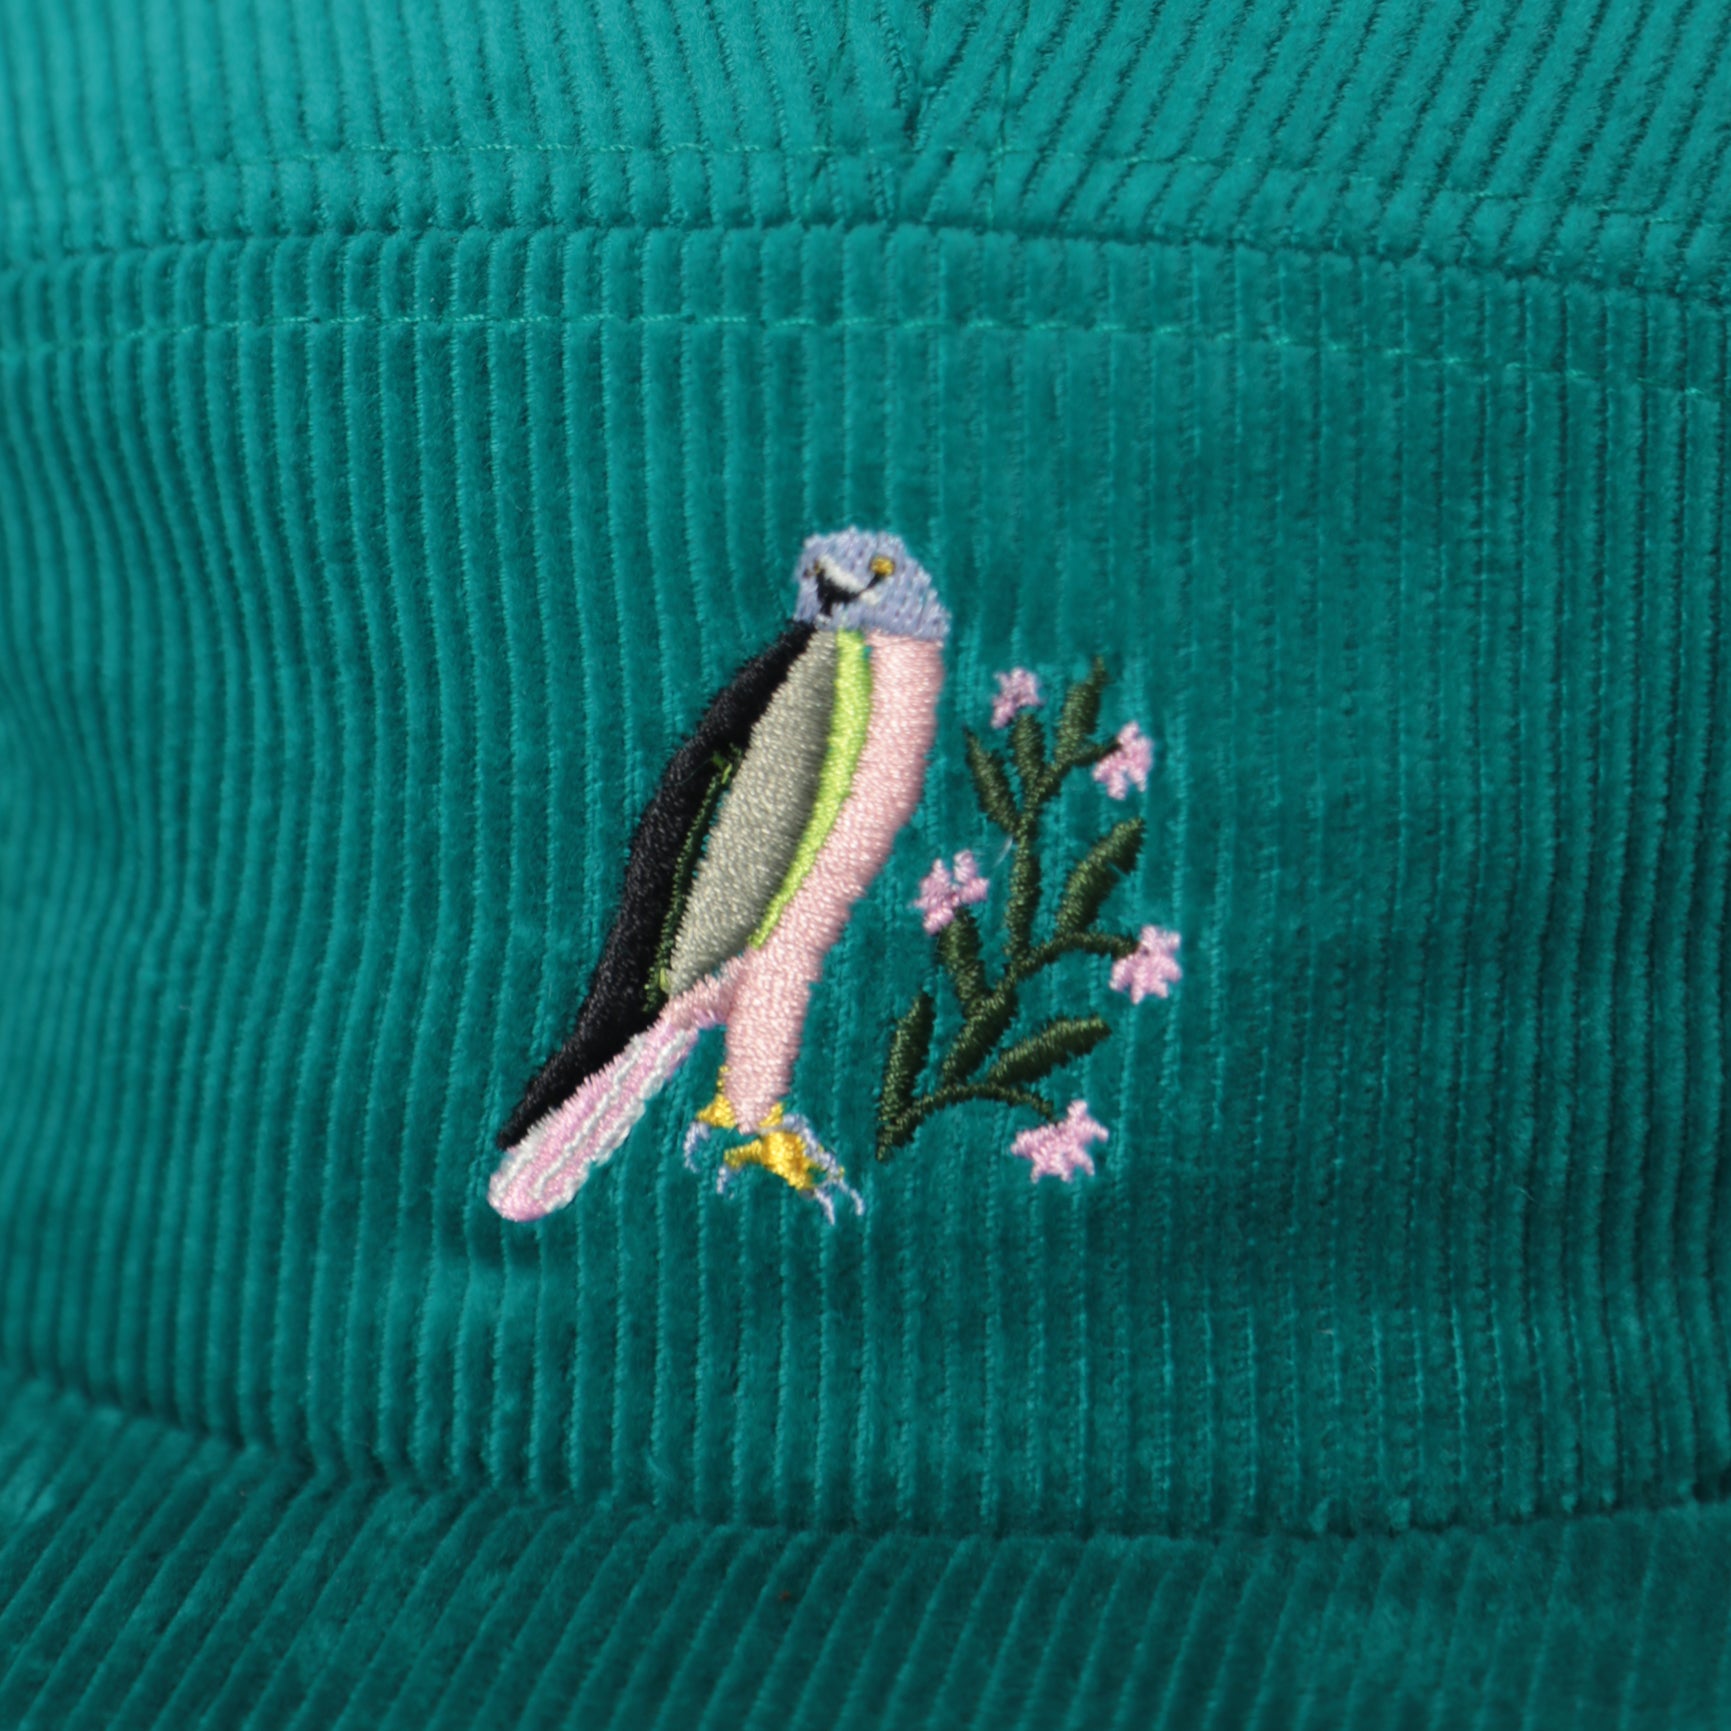 5 Panel - Teal Cord - Flower Bird Embroidery